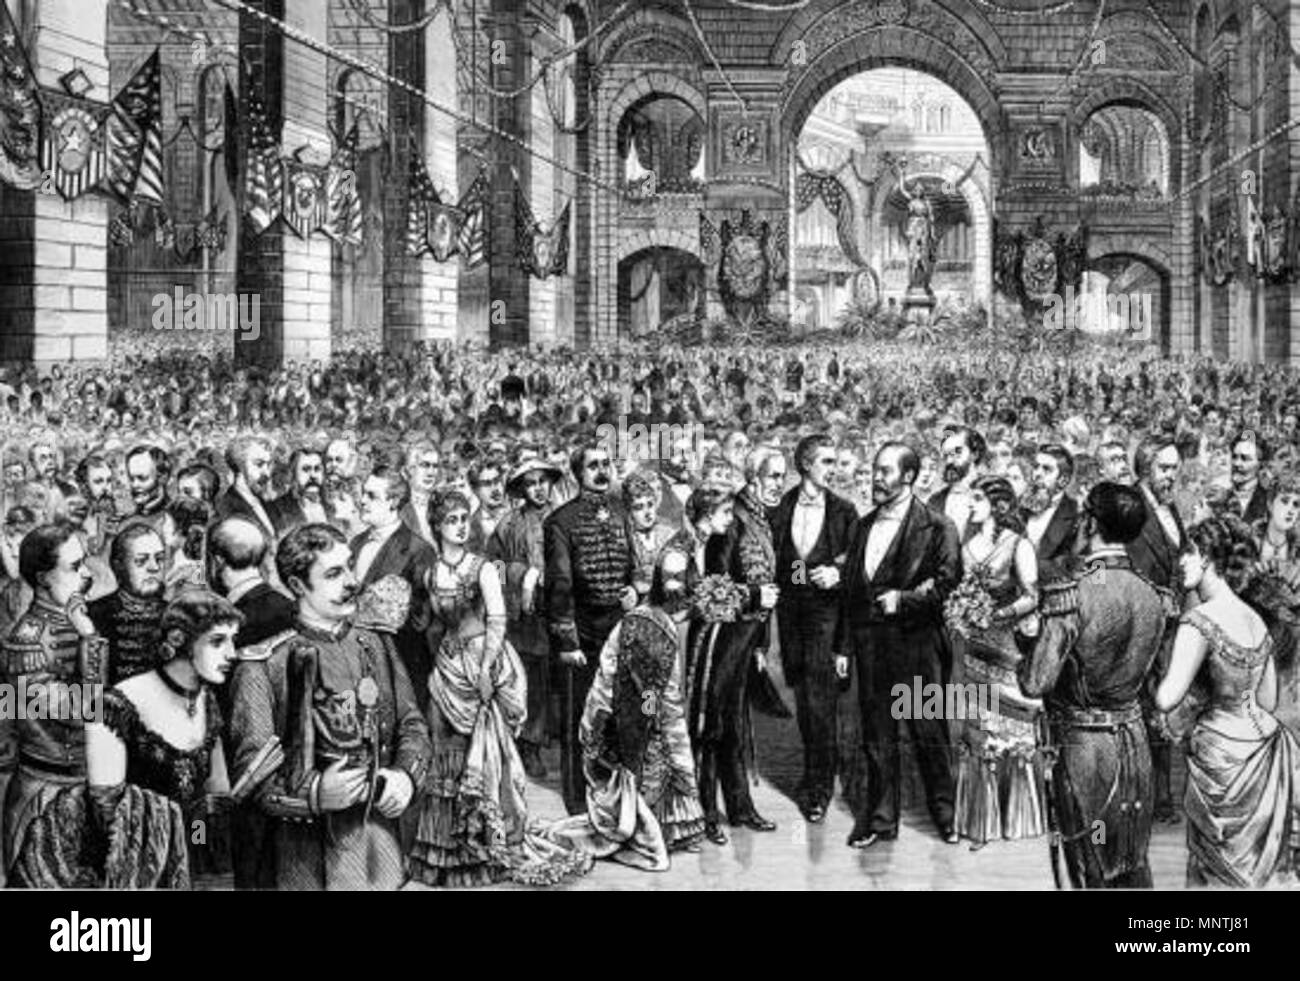 . English: The inaugural ball for president James Garfield held in the United States National Museum (present day Arts and Industries Building of the Smithsonian Institution) in Washington DC, 1881 . 3 September 2017. Unknown 1027 President James Garfield's inaugural ball, Washington DC 1881 Stock Photo